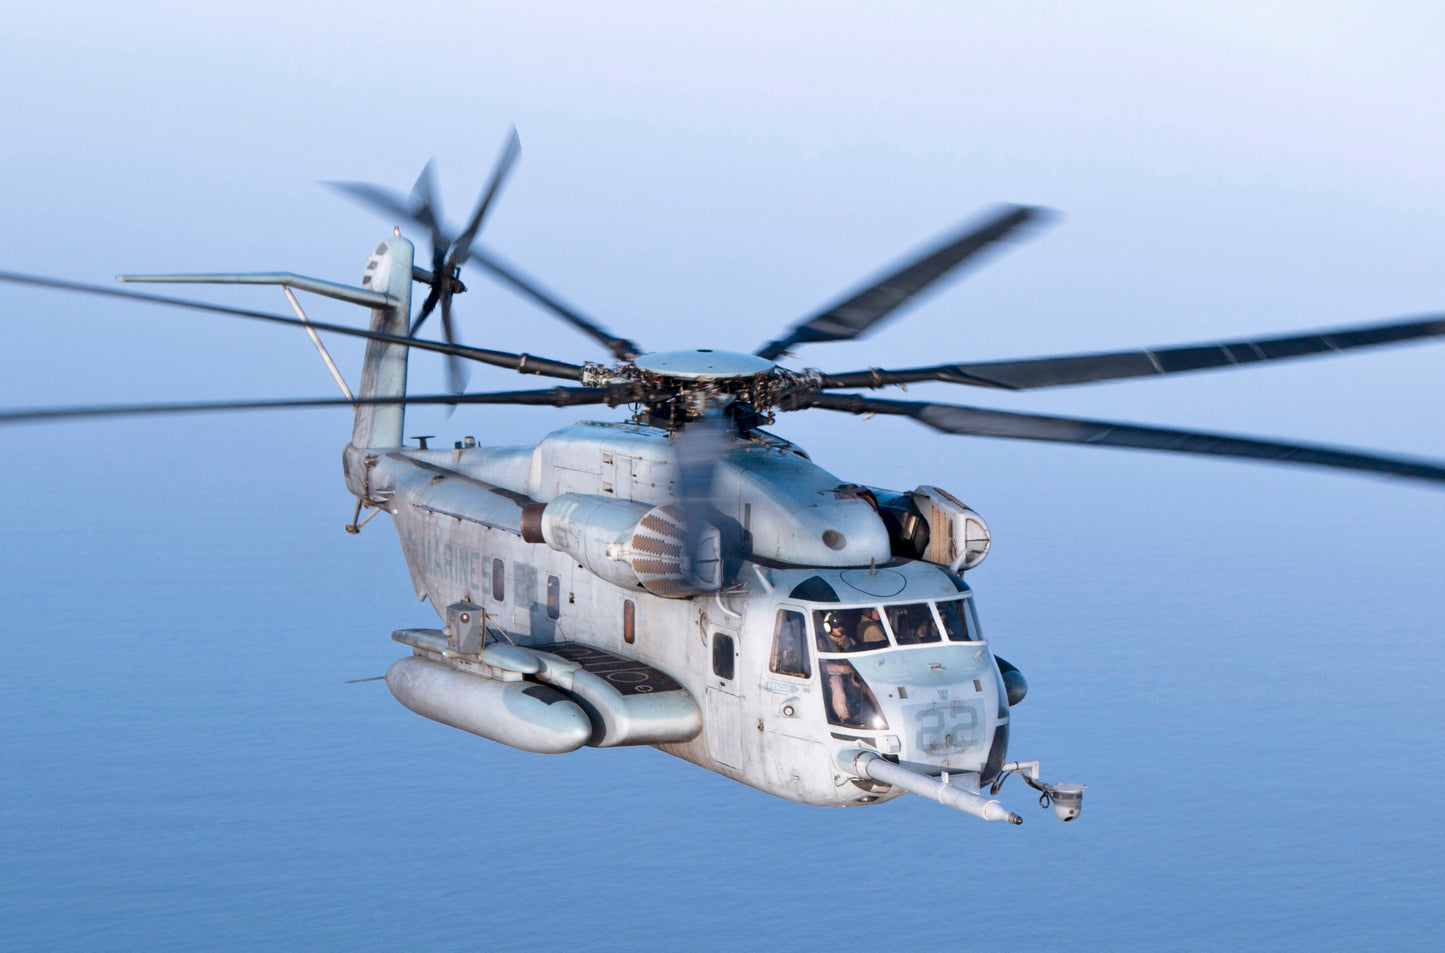 SIKORSKY CH-53E SUPER STALLION GLOSSY POSTER PICTURE PHOTO PRINT BANNER us